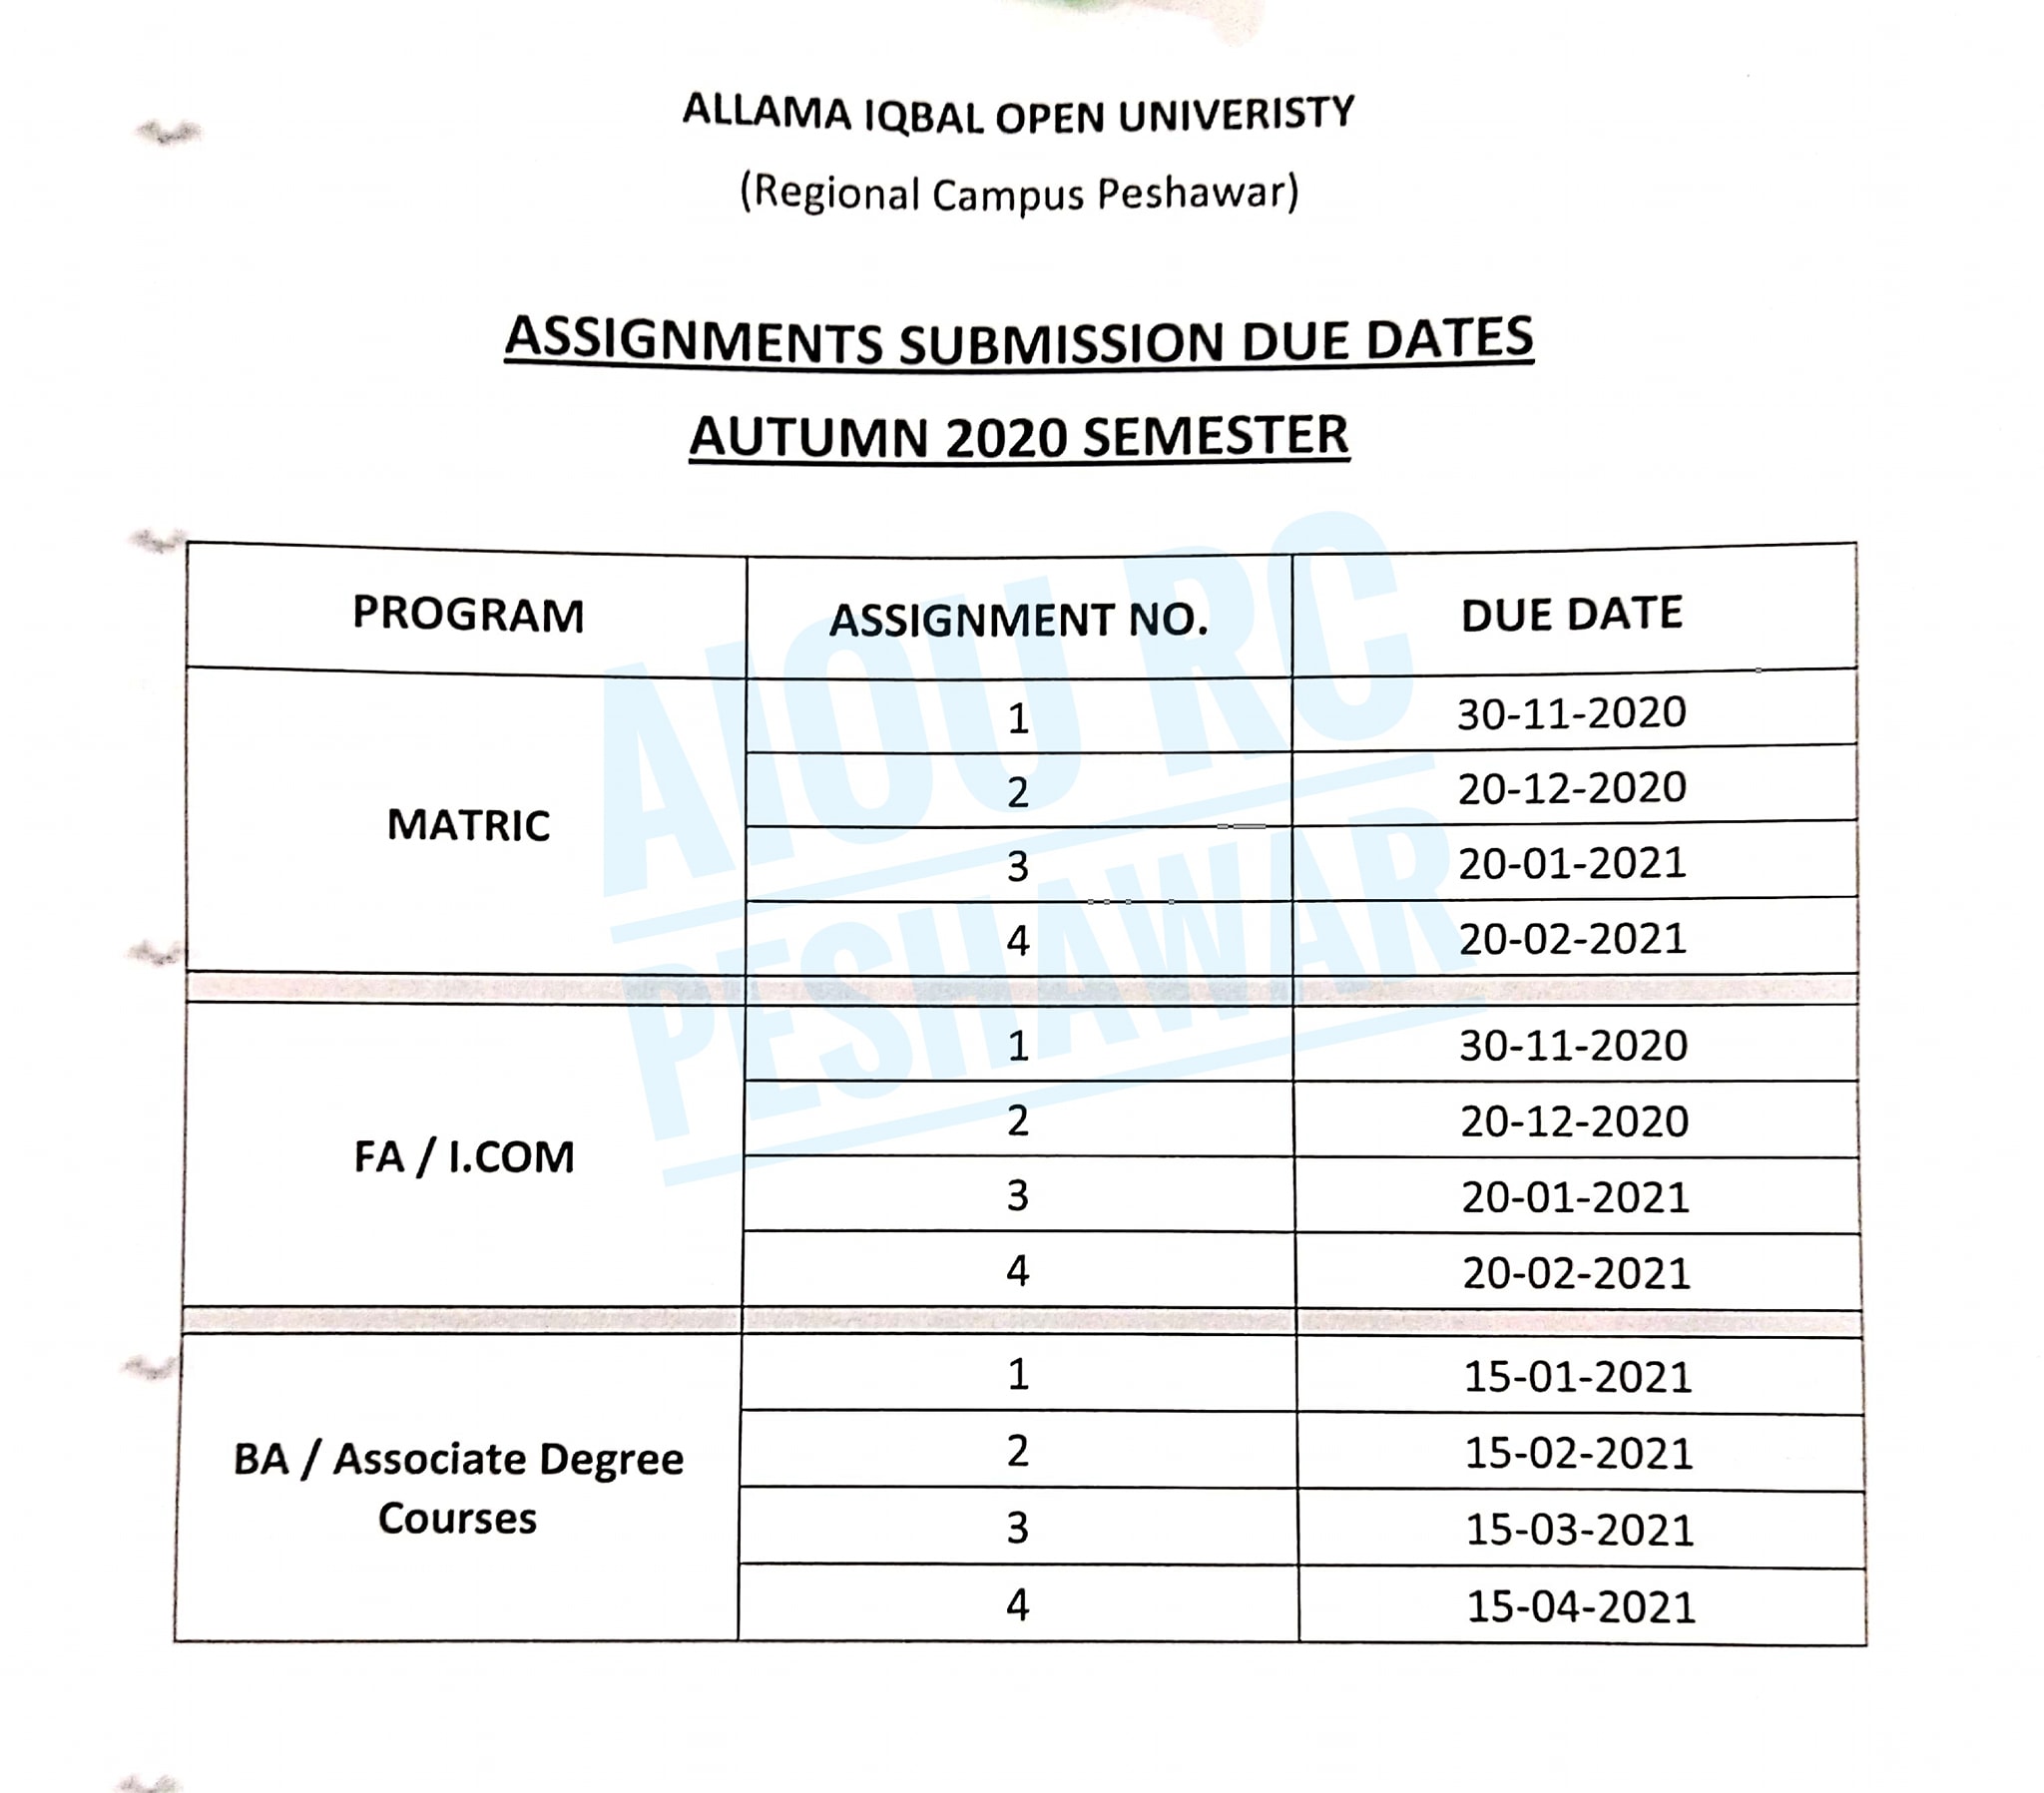 Assignments Submission due Dates Autumn 2020 Semester AIOU